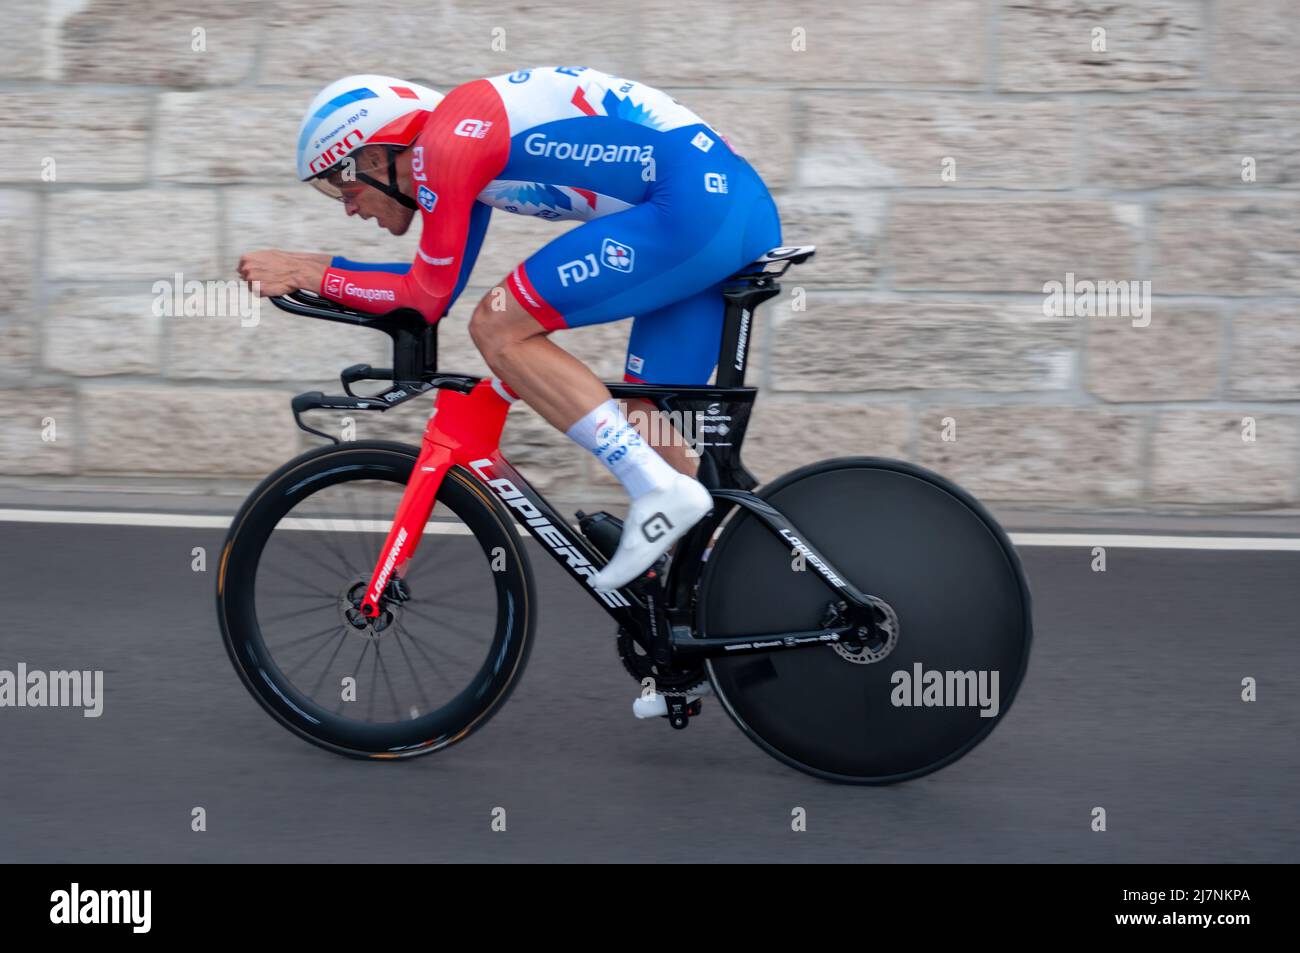 BUDAPEST, HUNGARY - MAY 07, 2022: Pro cyclist Nr. 113 Jacopo Guarnieri GROUPAMA - FDJ, Giro D'Italia Stage 2 Time trial - cycling competition on May 0 Stock Photo